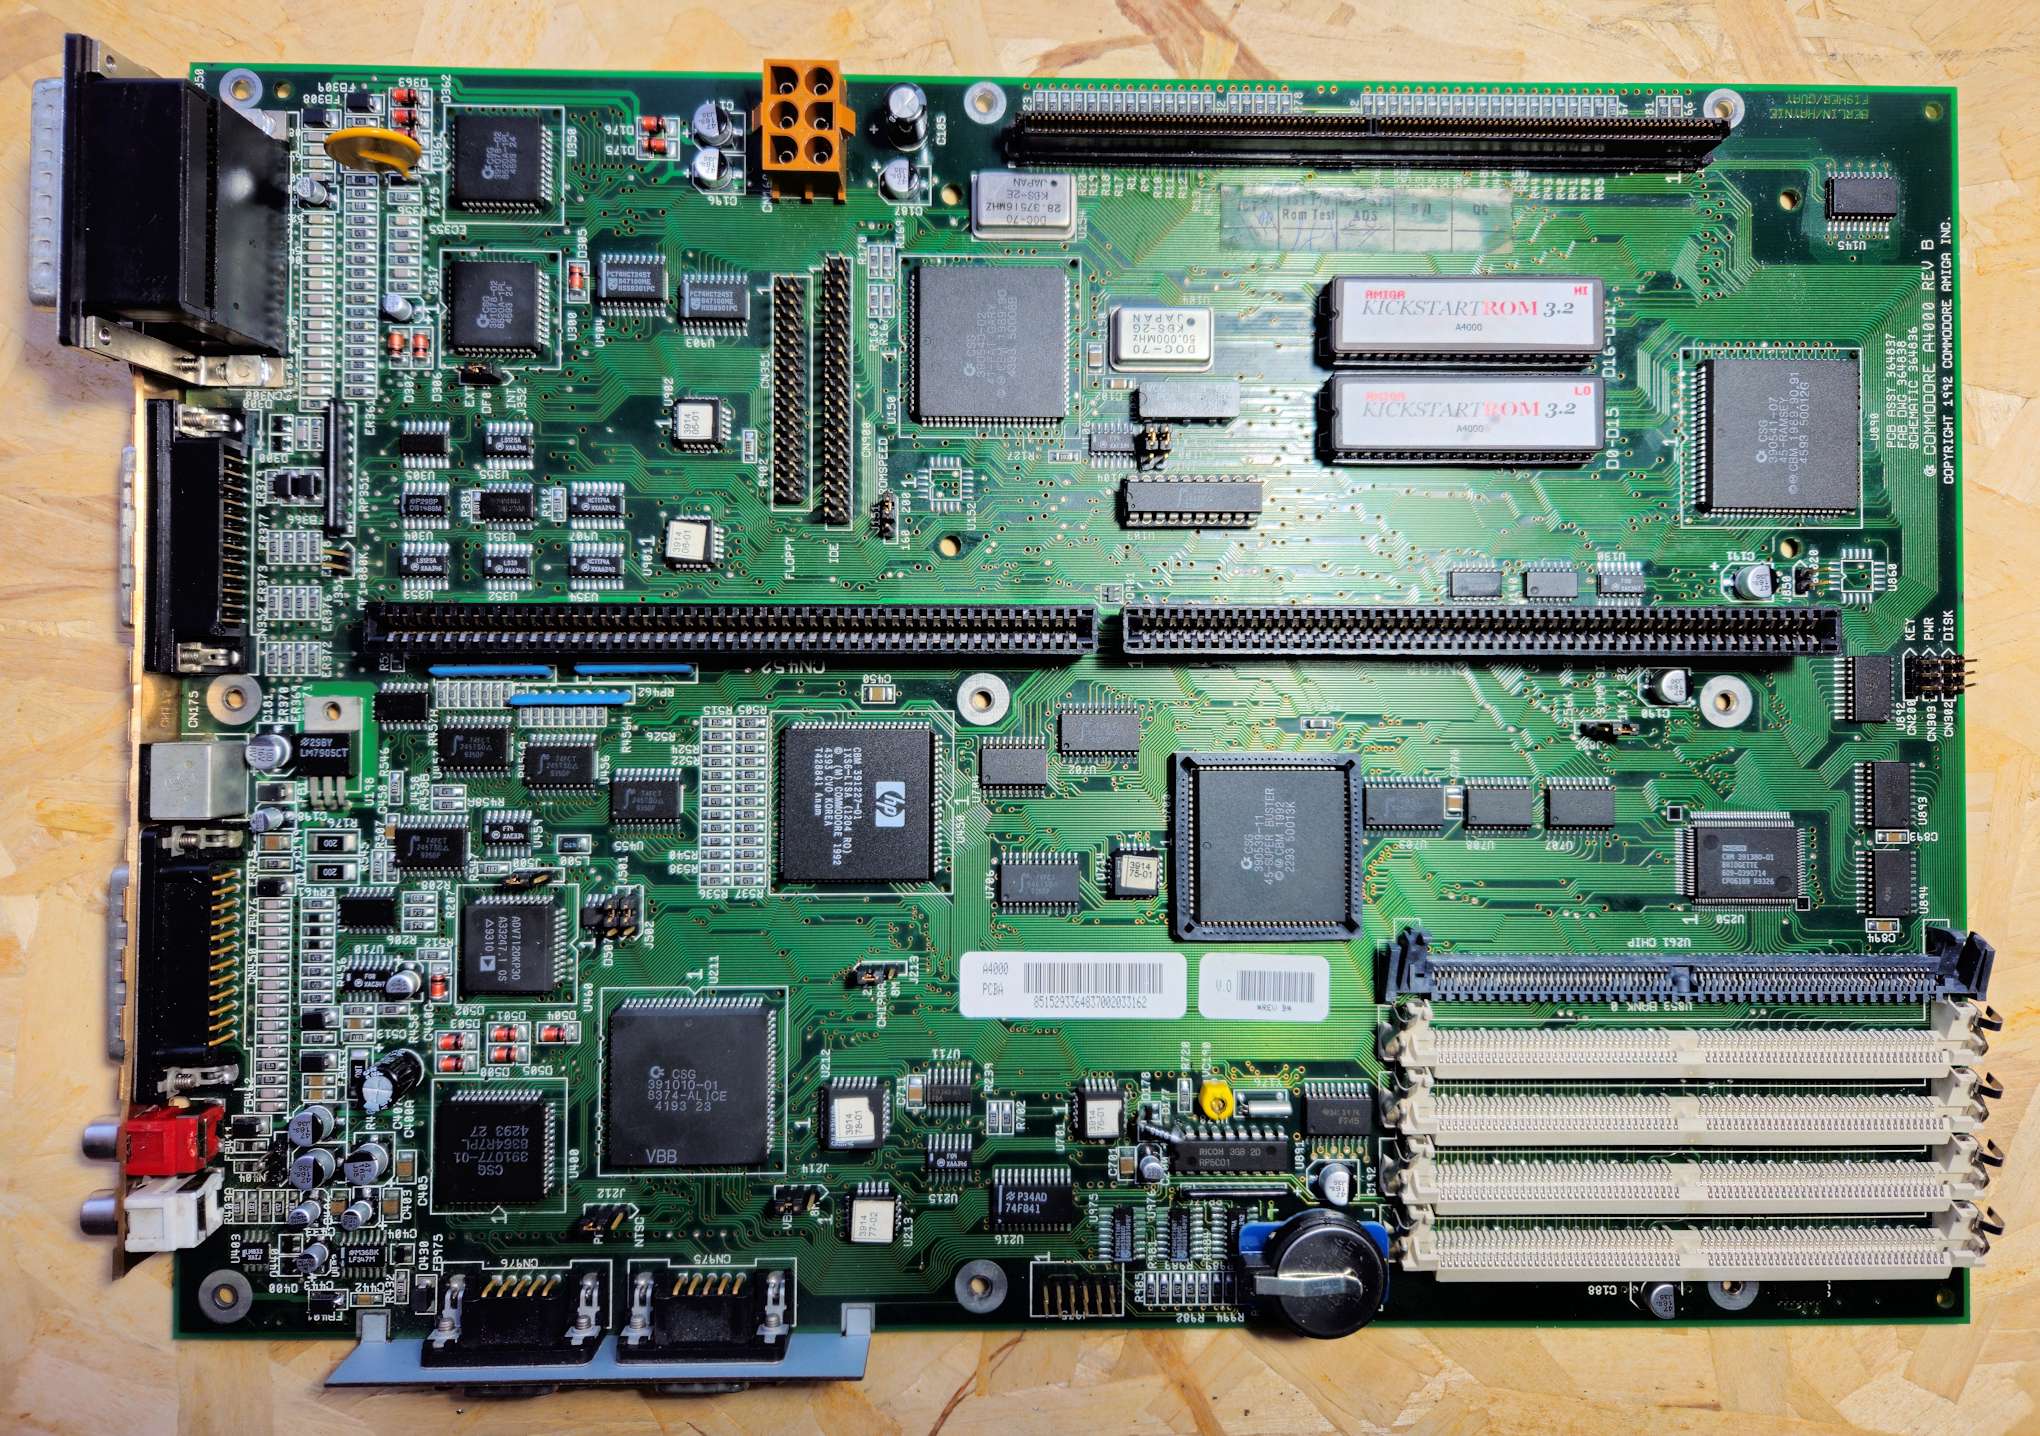 Overview of the Amiga 4000 Rev B Motherboard